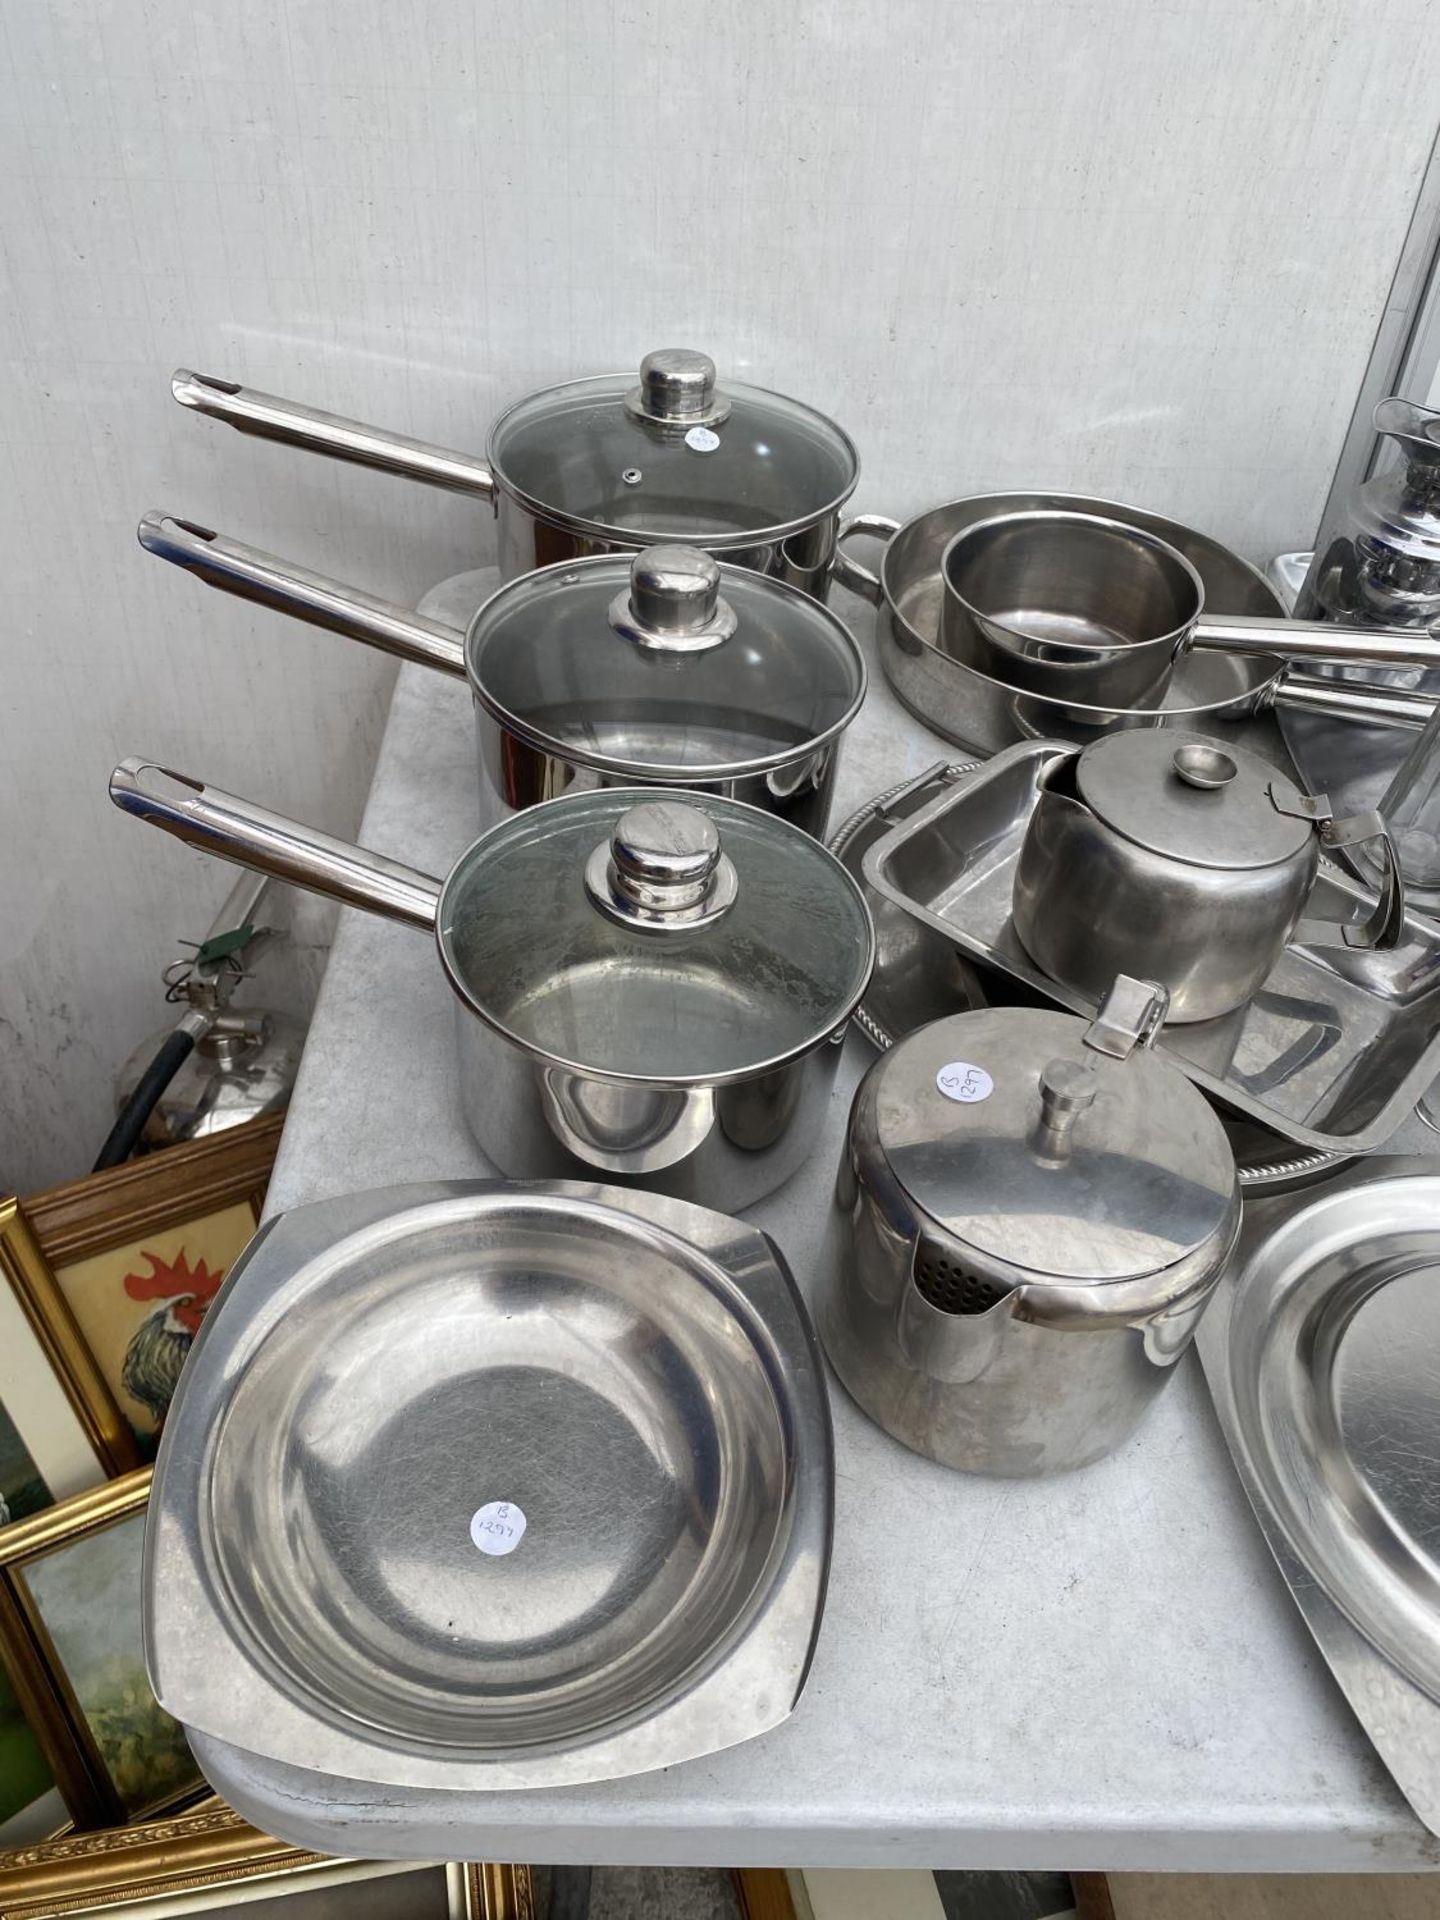 A LARGE ASSORTMENT OF STAINKLESS STEEL KITCHEN WARE TO INCLUDE PANS, TEAPOTS AND DISHES ETC - Image 2 of 3